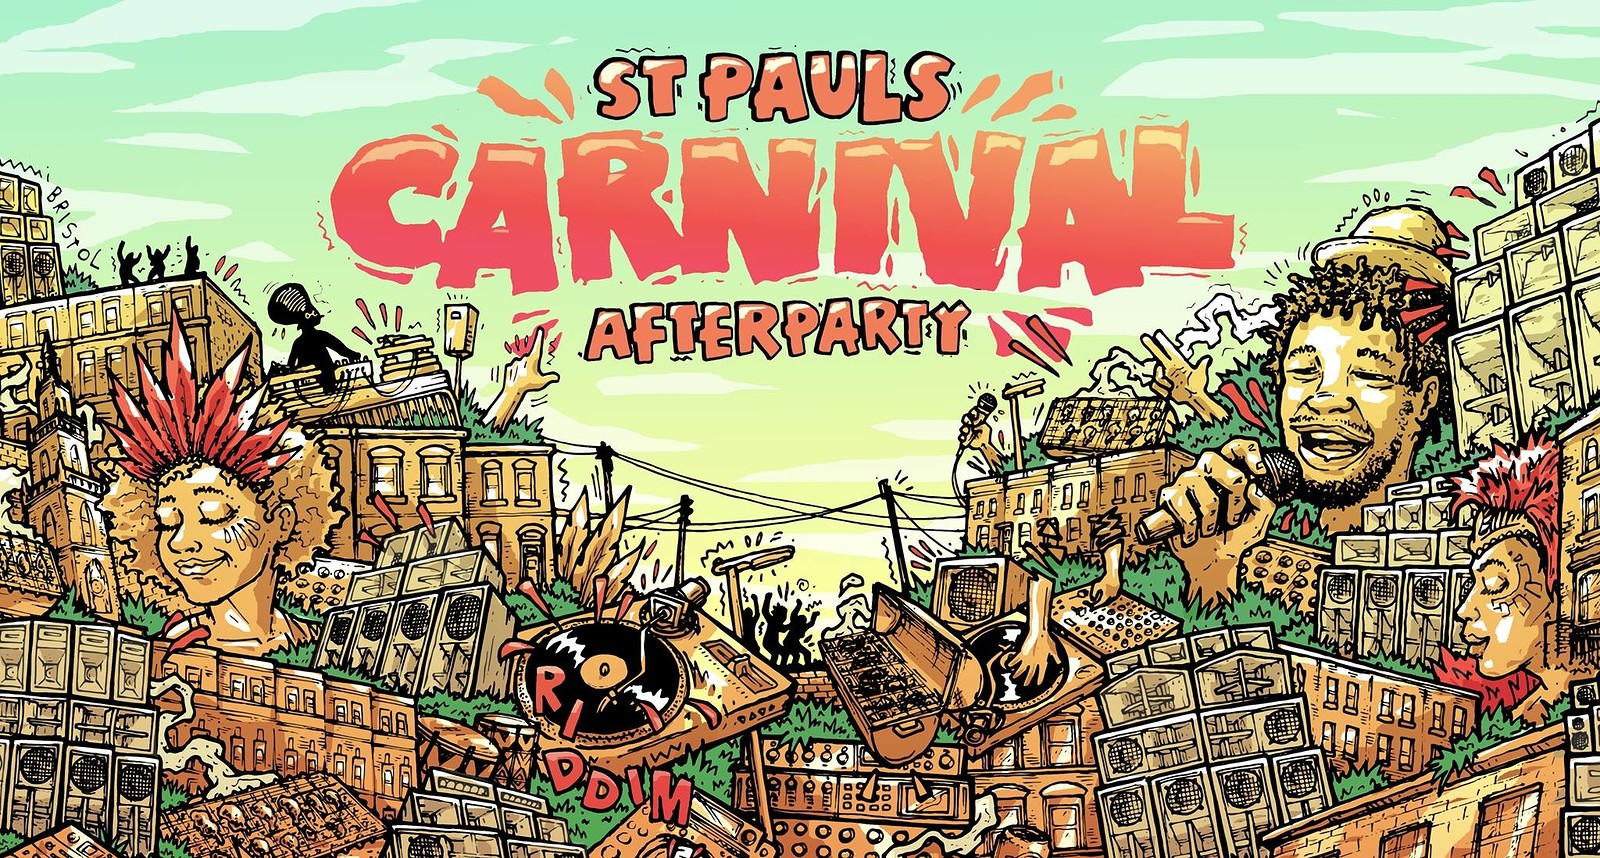 St. Paul's Carnival Afterparty tickets, Lakota 14.00 from Headfirst